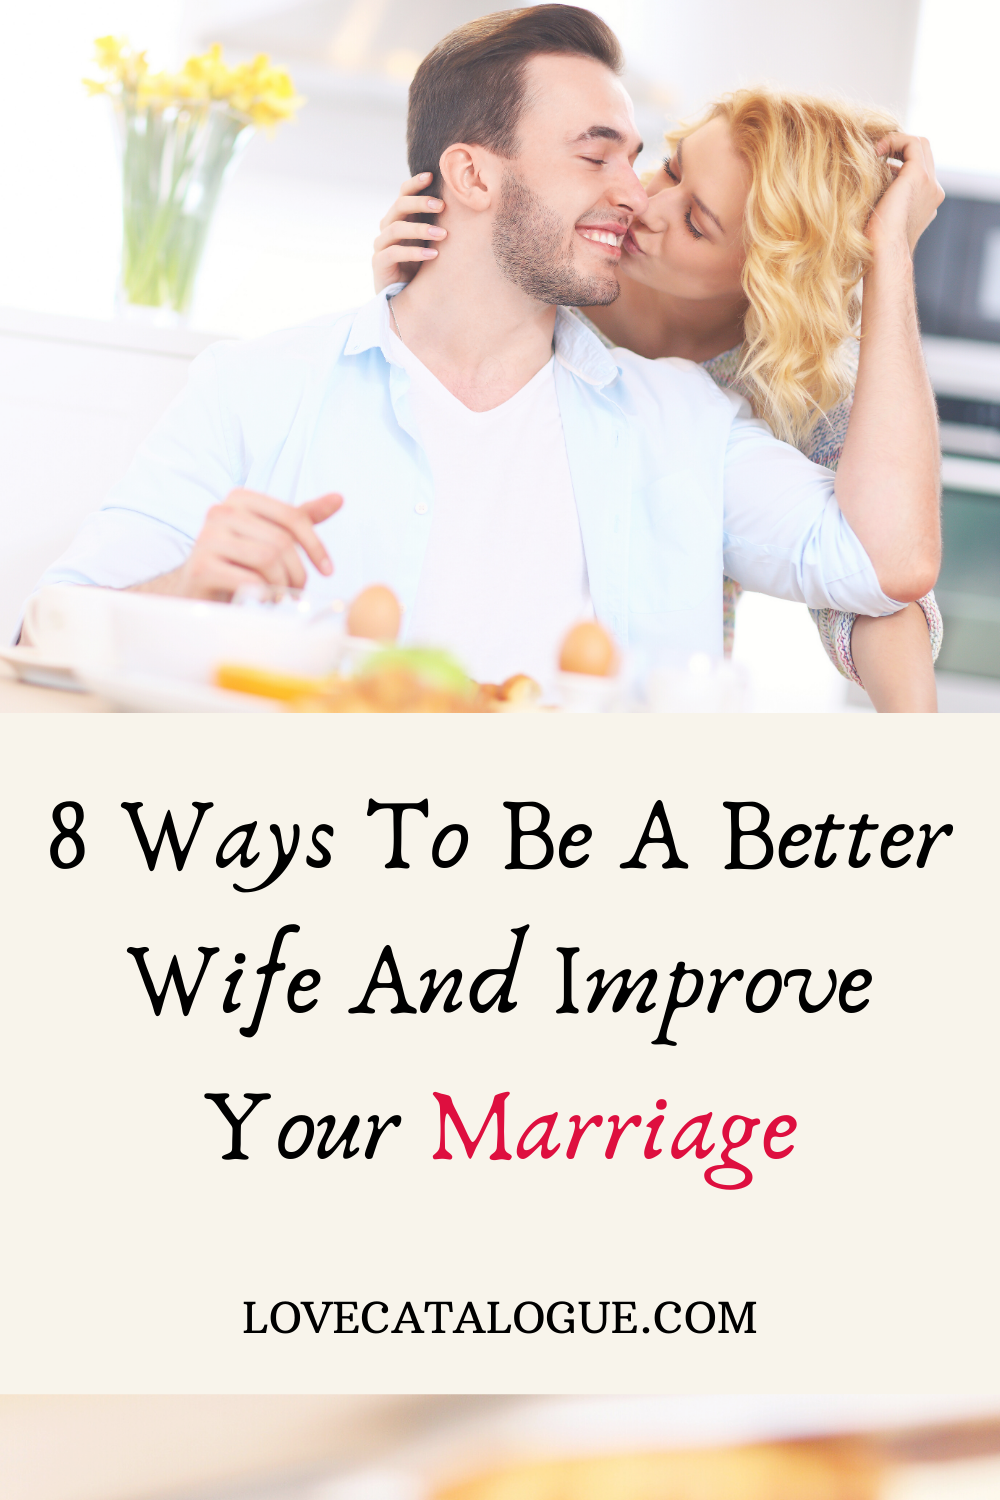 How to be a better wife